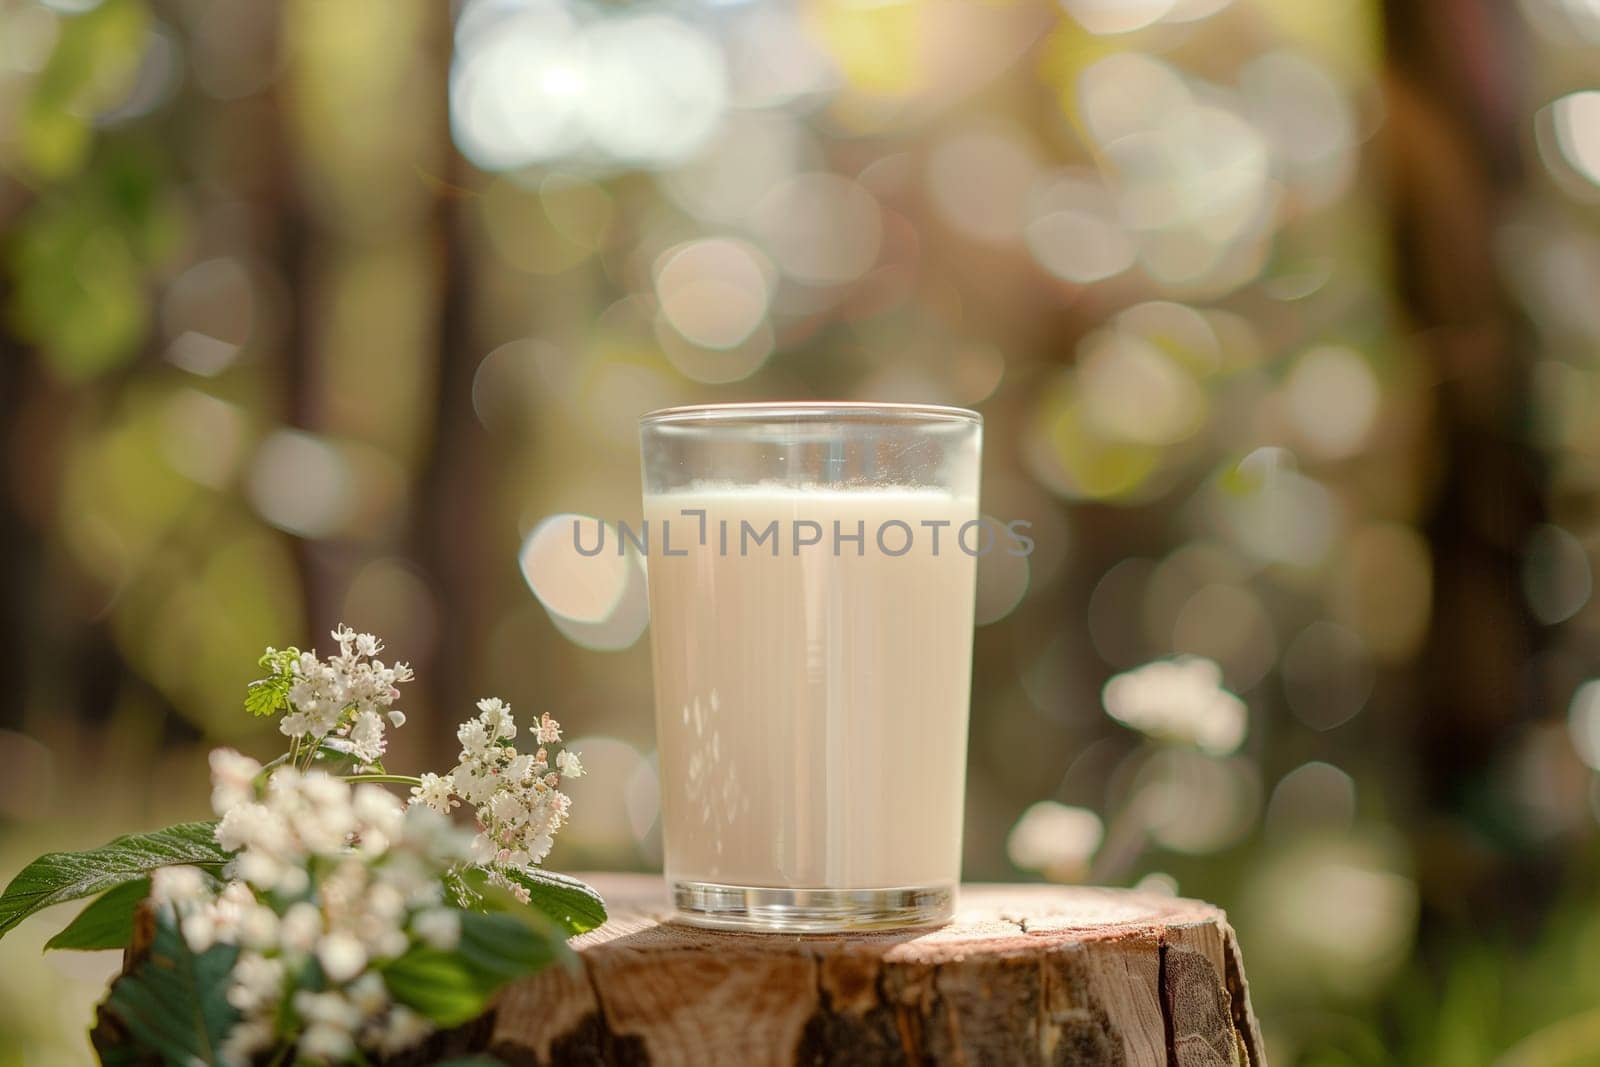 A glass of milk sits stably on top of a tree stump, showcasing a unique juxtaposition of nature and a man-made object.